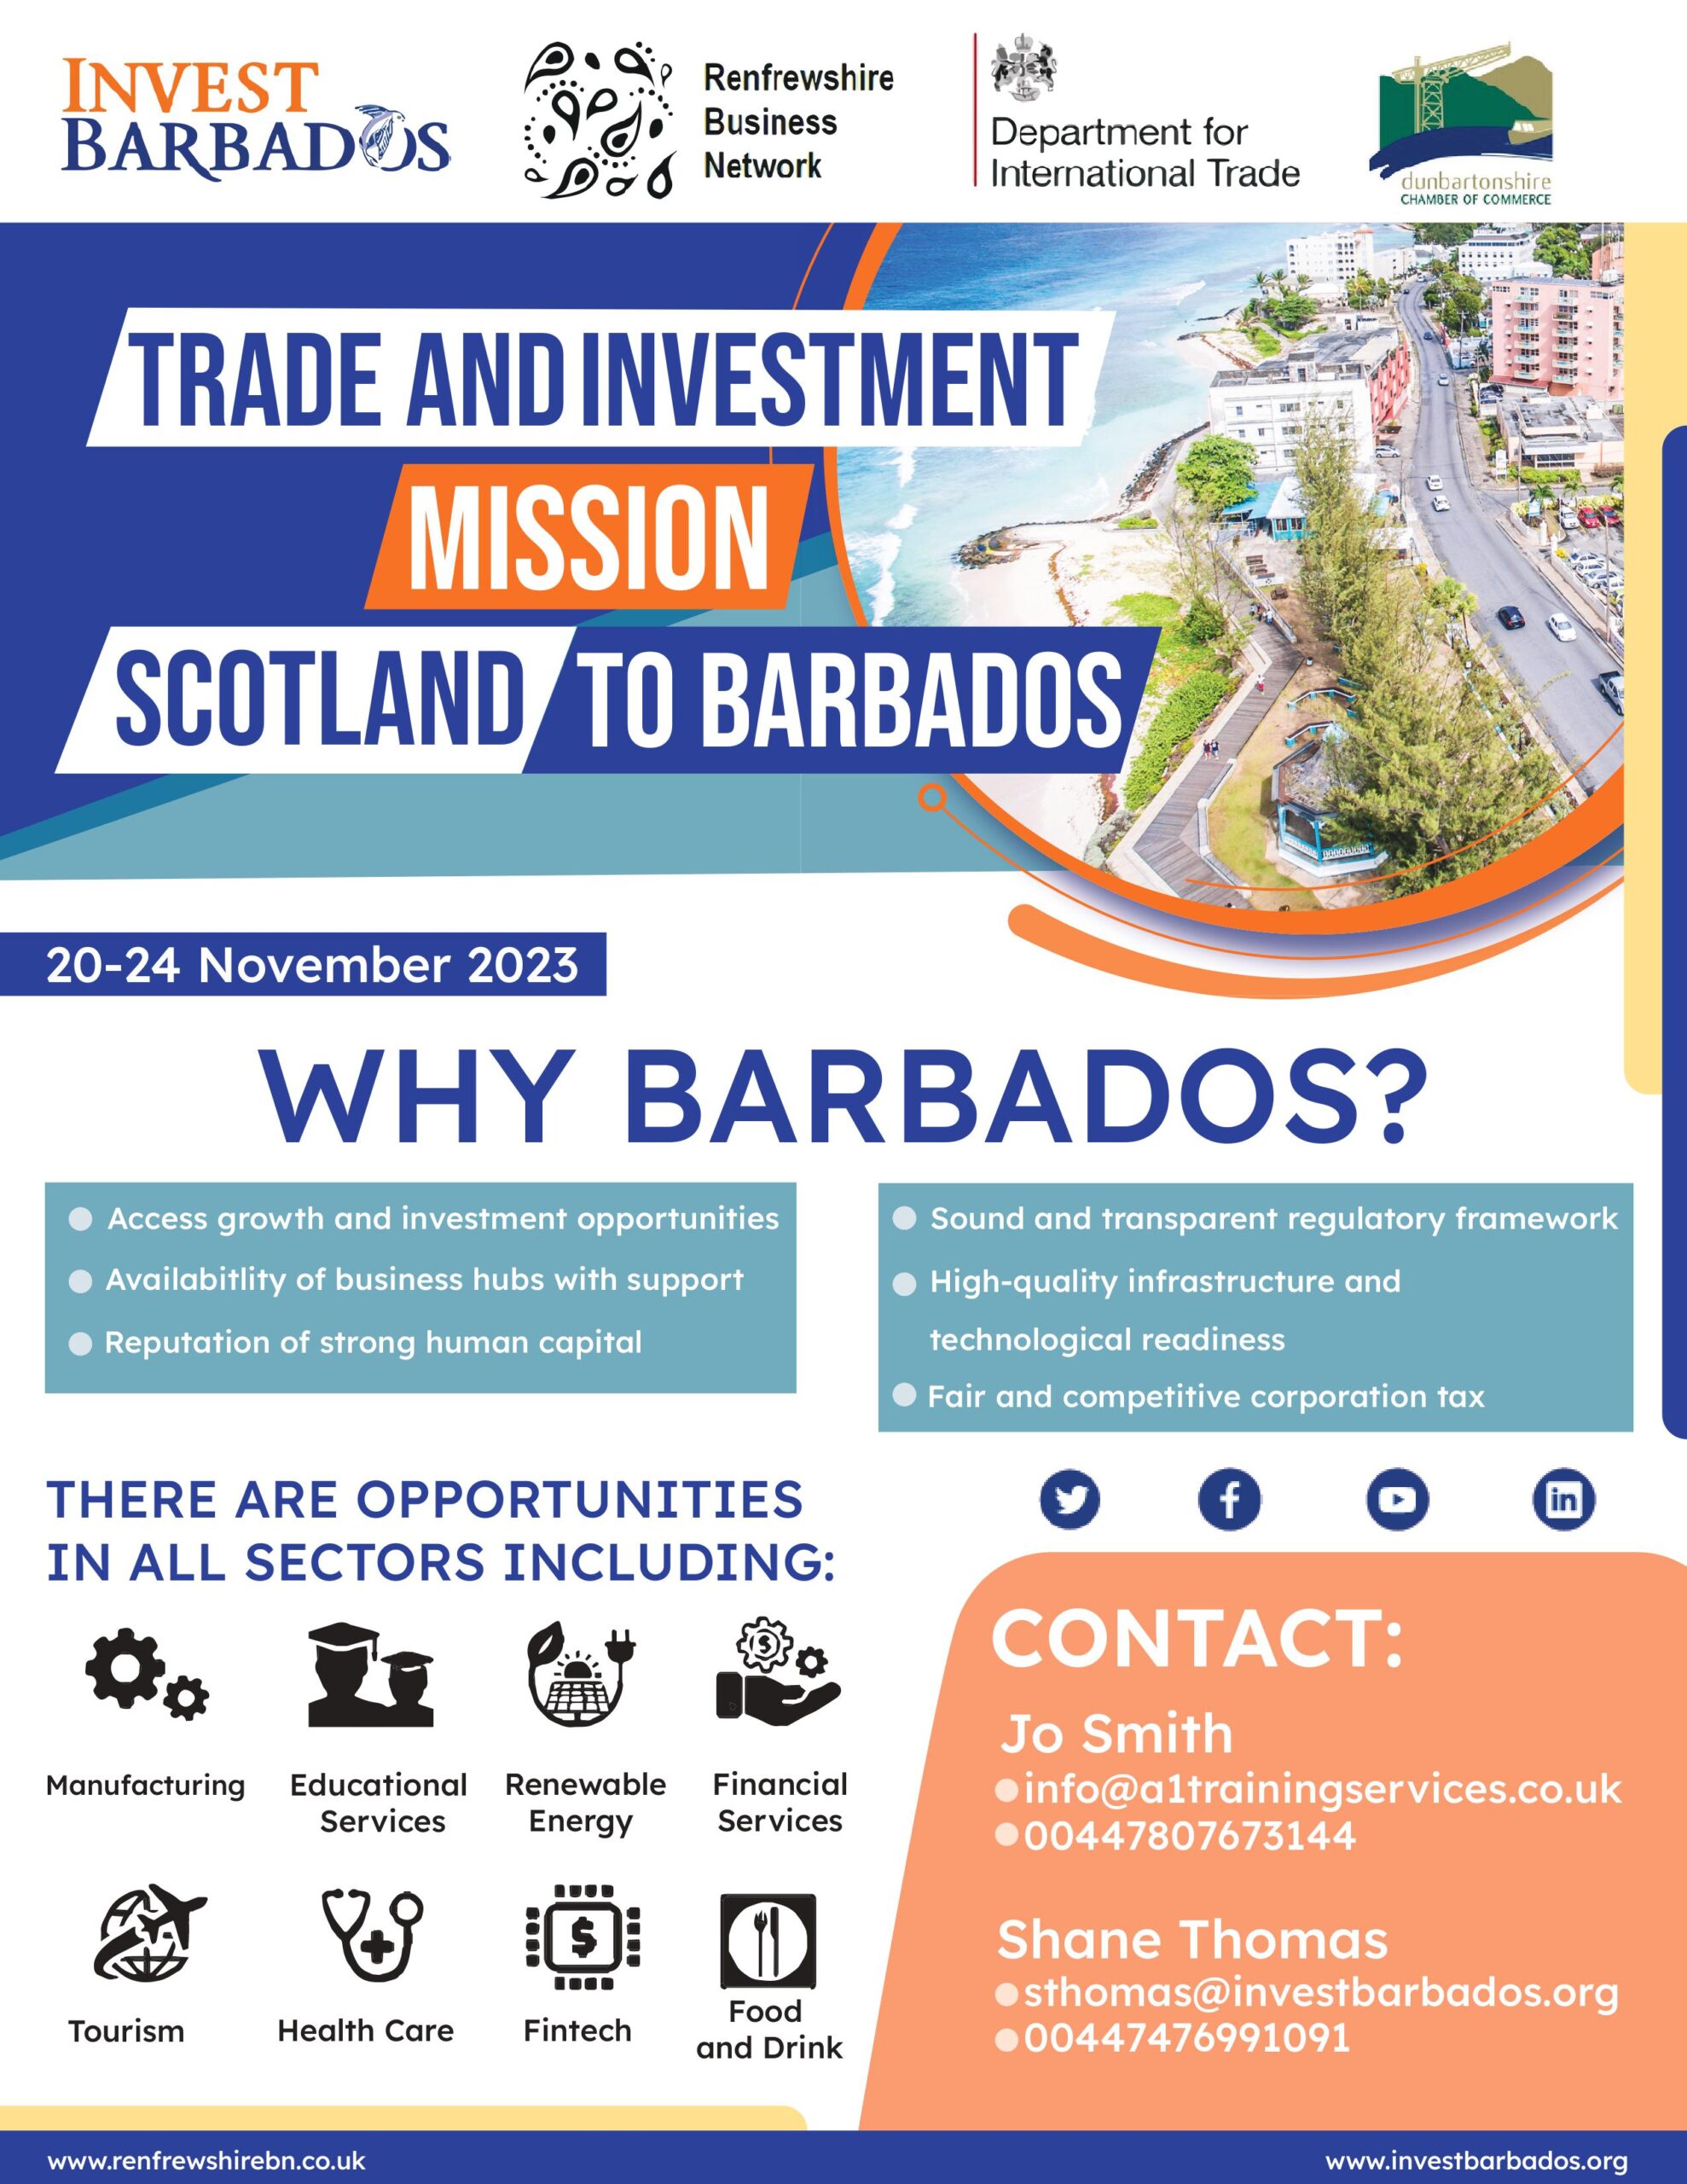 Trade and Investment Mission - Scotland to Barbados